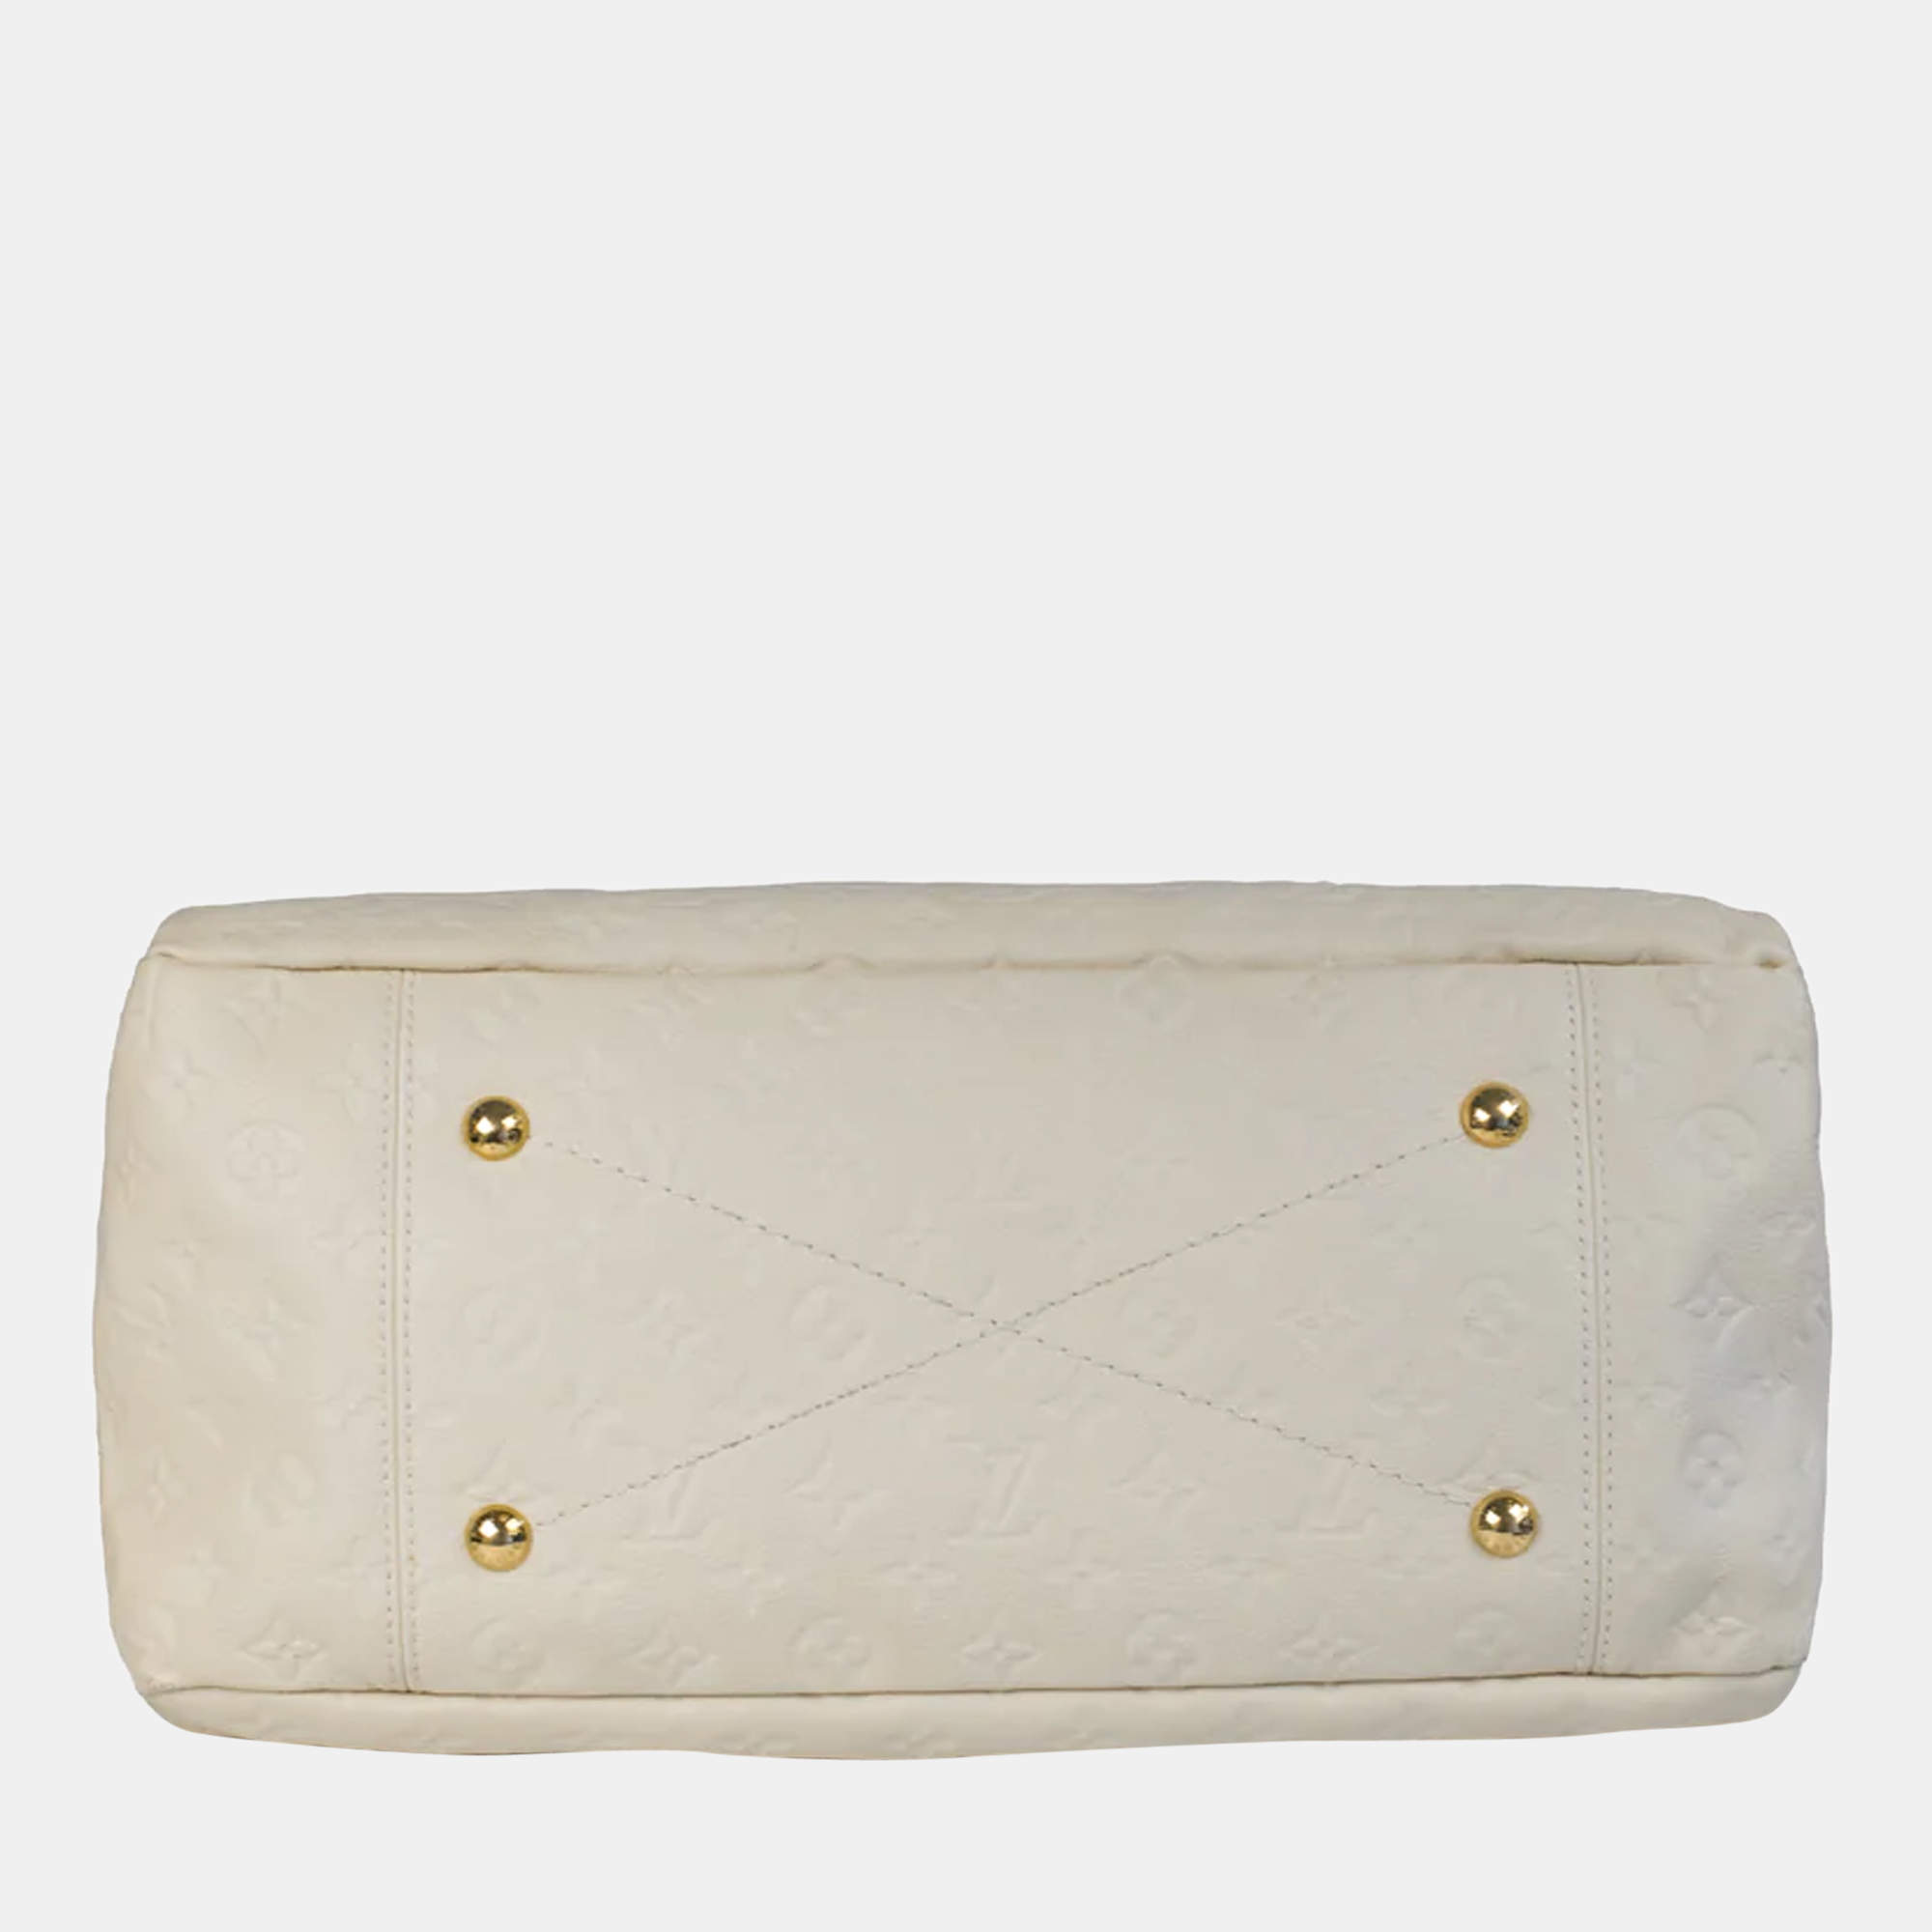 Artsy leather handbag Louis Vuitton White in Leather - 25596344